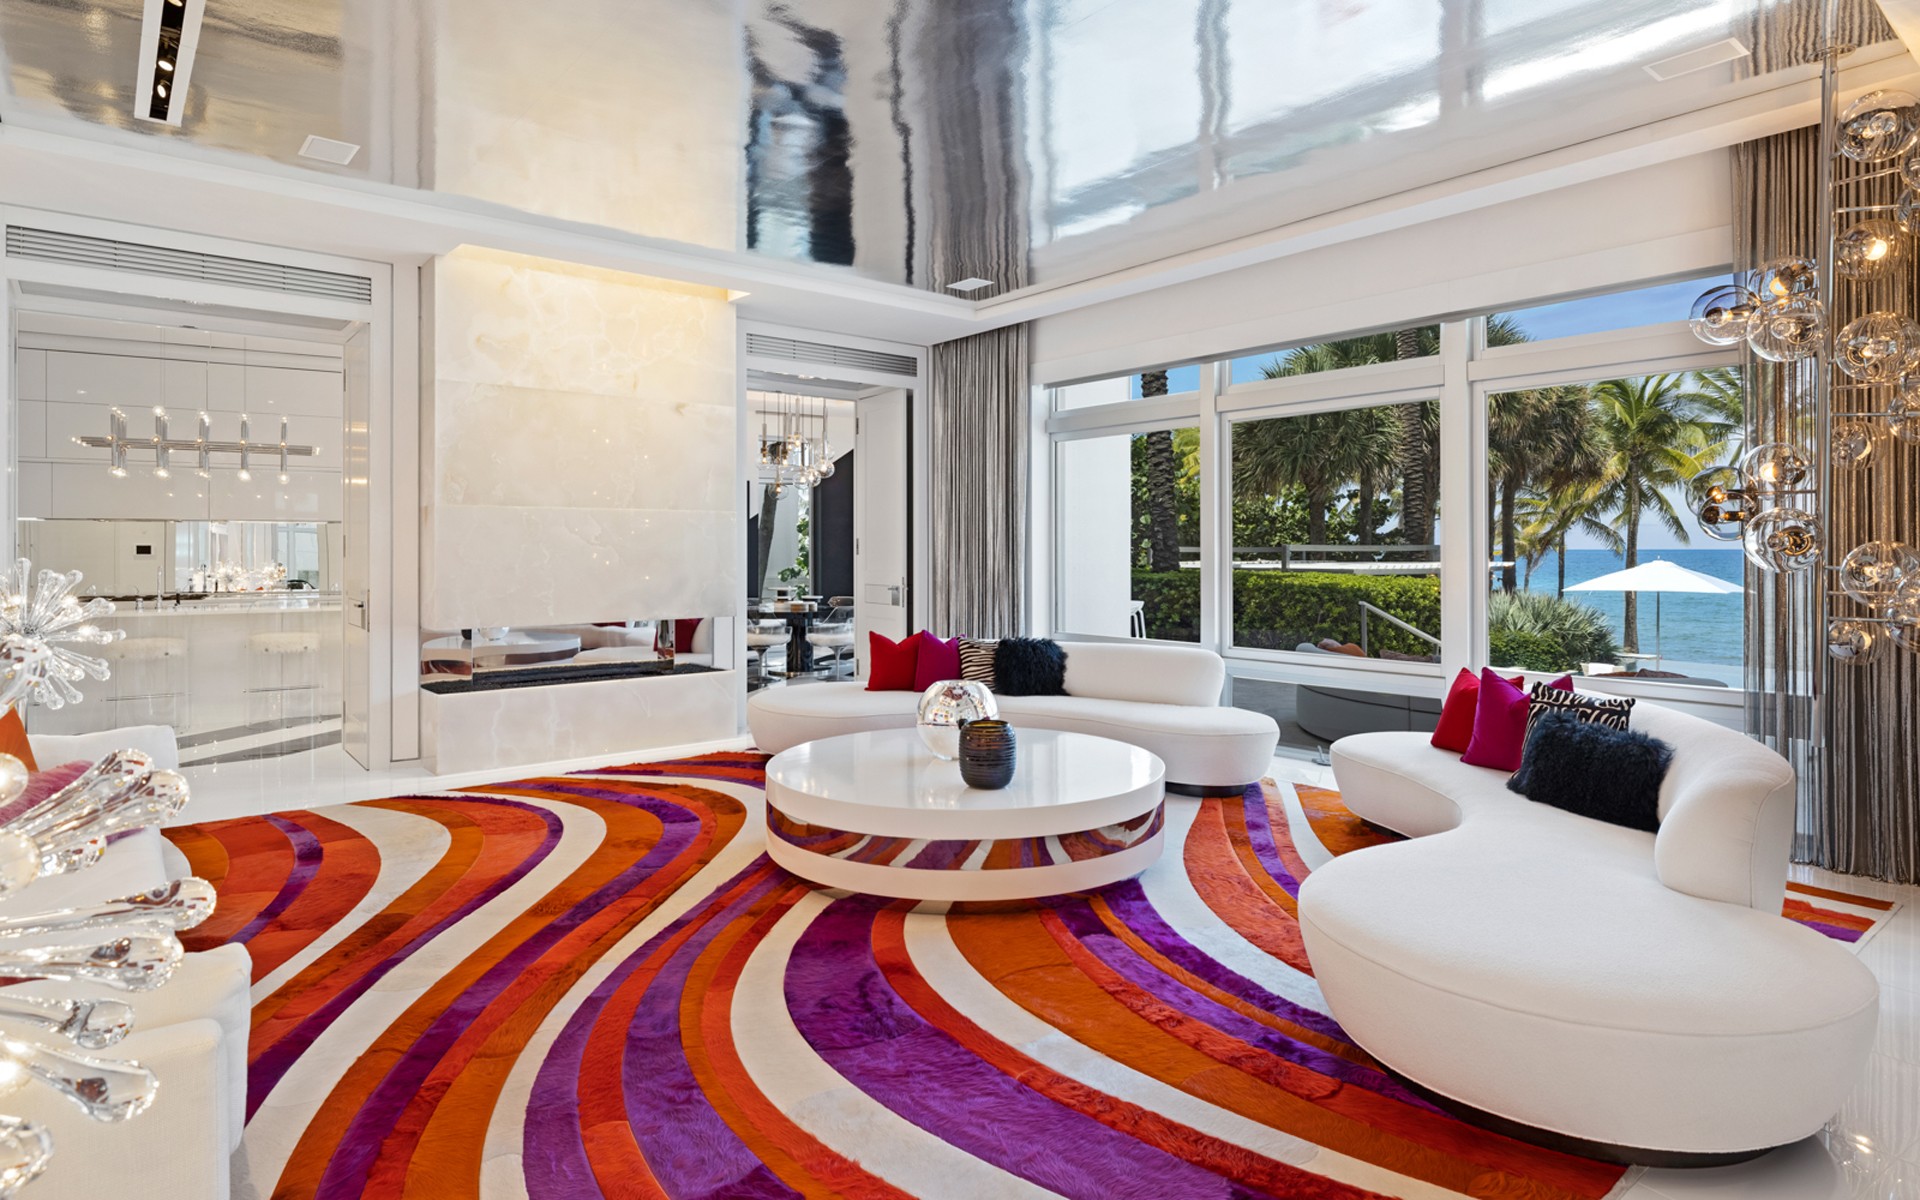 Tommy Hilfiger's Vibrant Miami Mansion Hits the Market for $24.5 Million Galerie